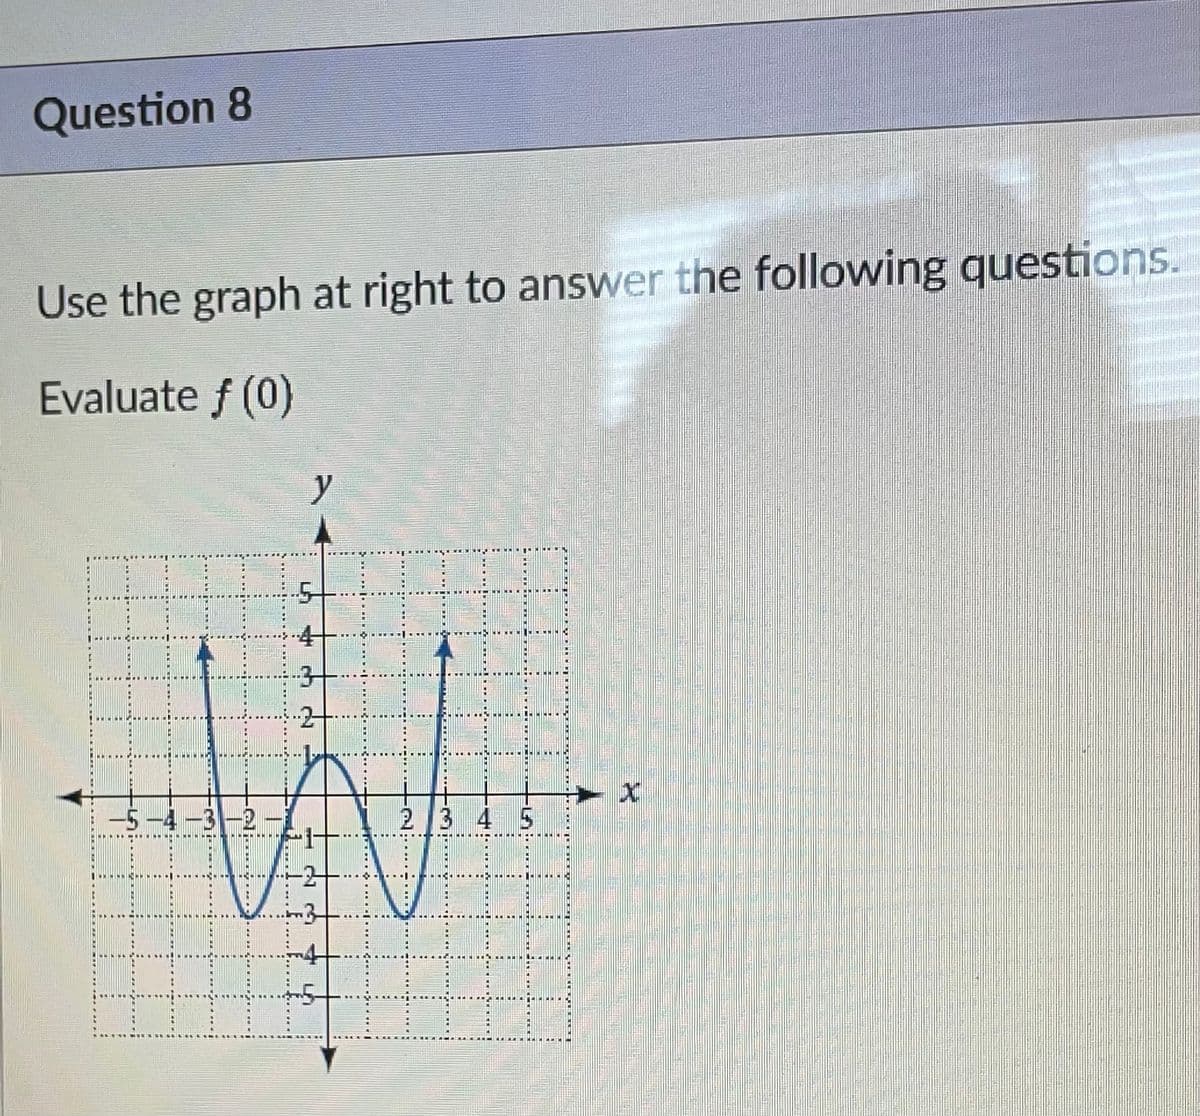 Question 8
Use the graph at right to answer the following questions.
Evaluate f (0)
y
2 3 4 5
